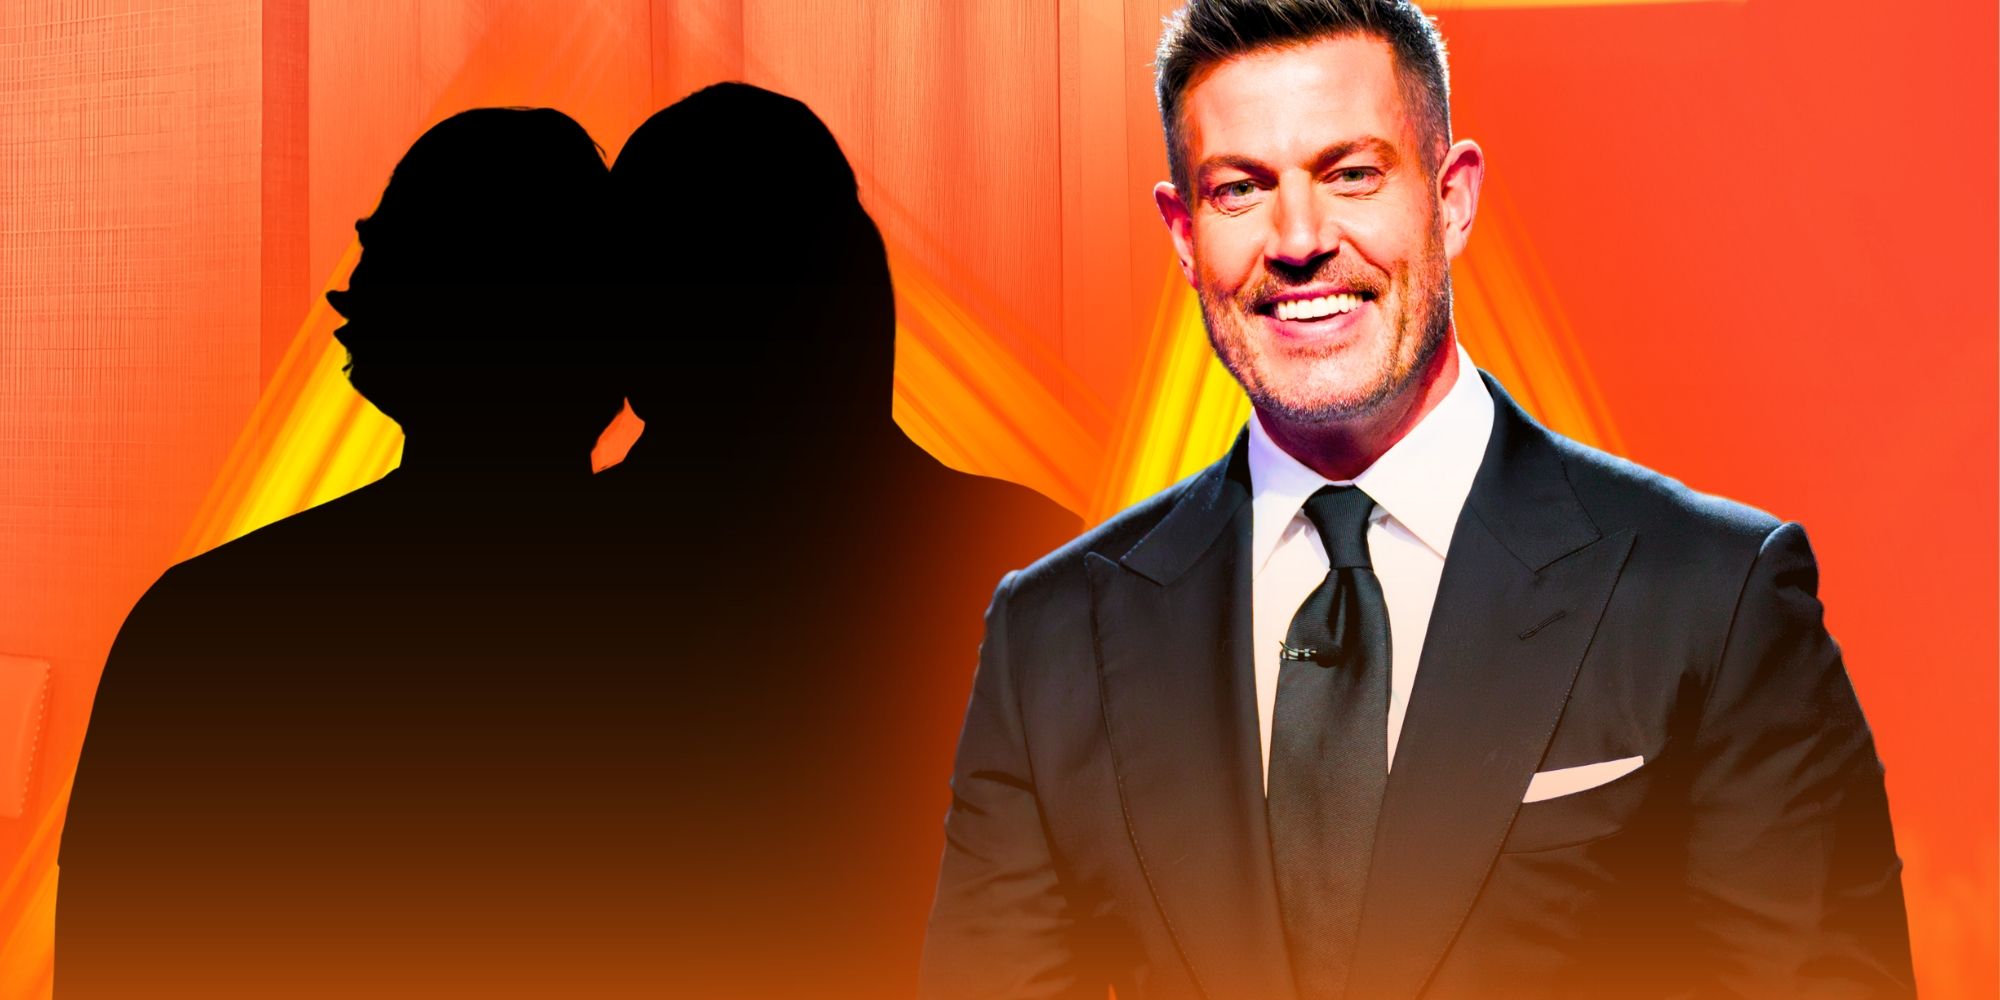 Bachelor host Jesse Palmer, with silhouette of a couple